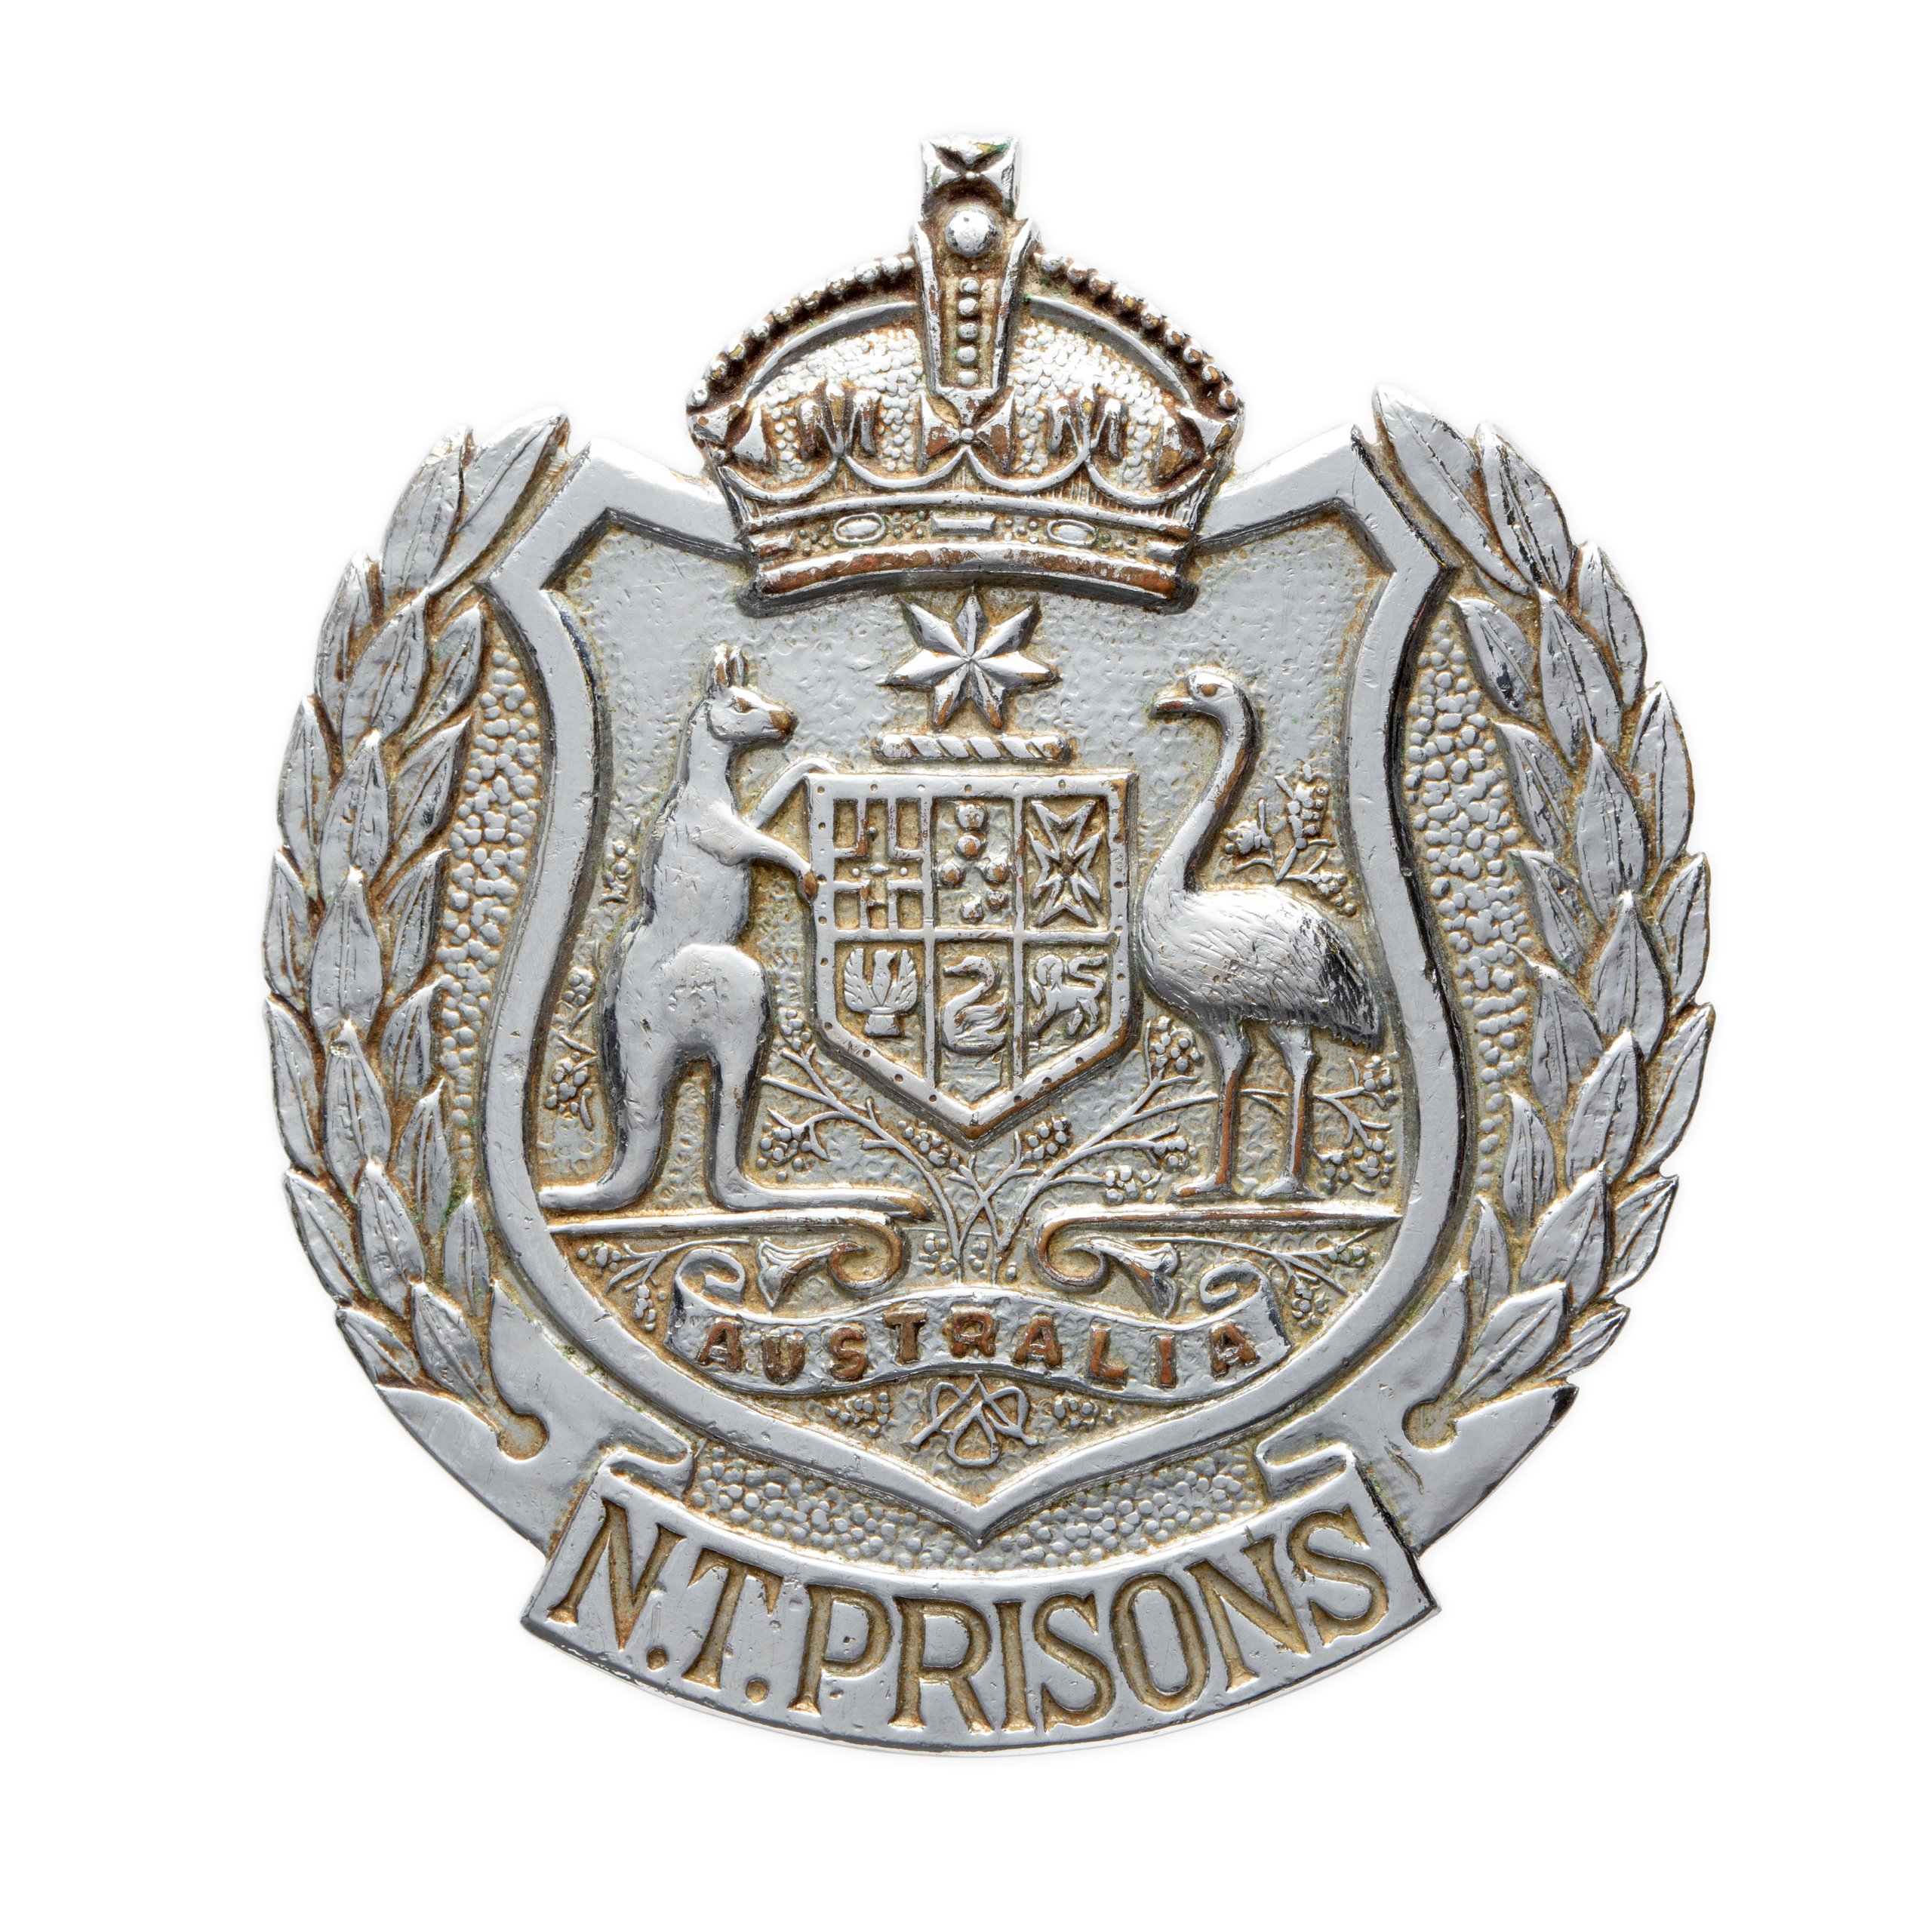 'Northern Territory Prisons' hat badge